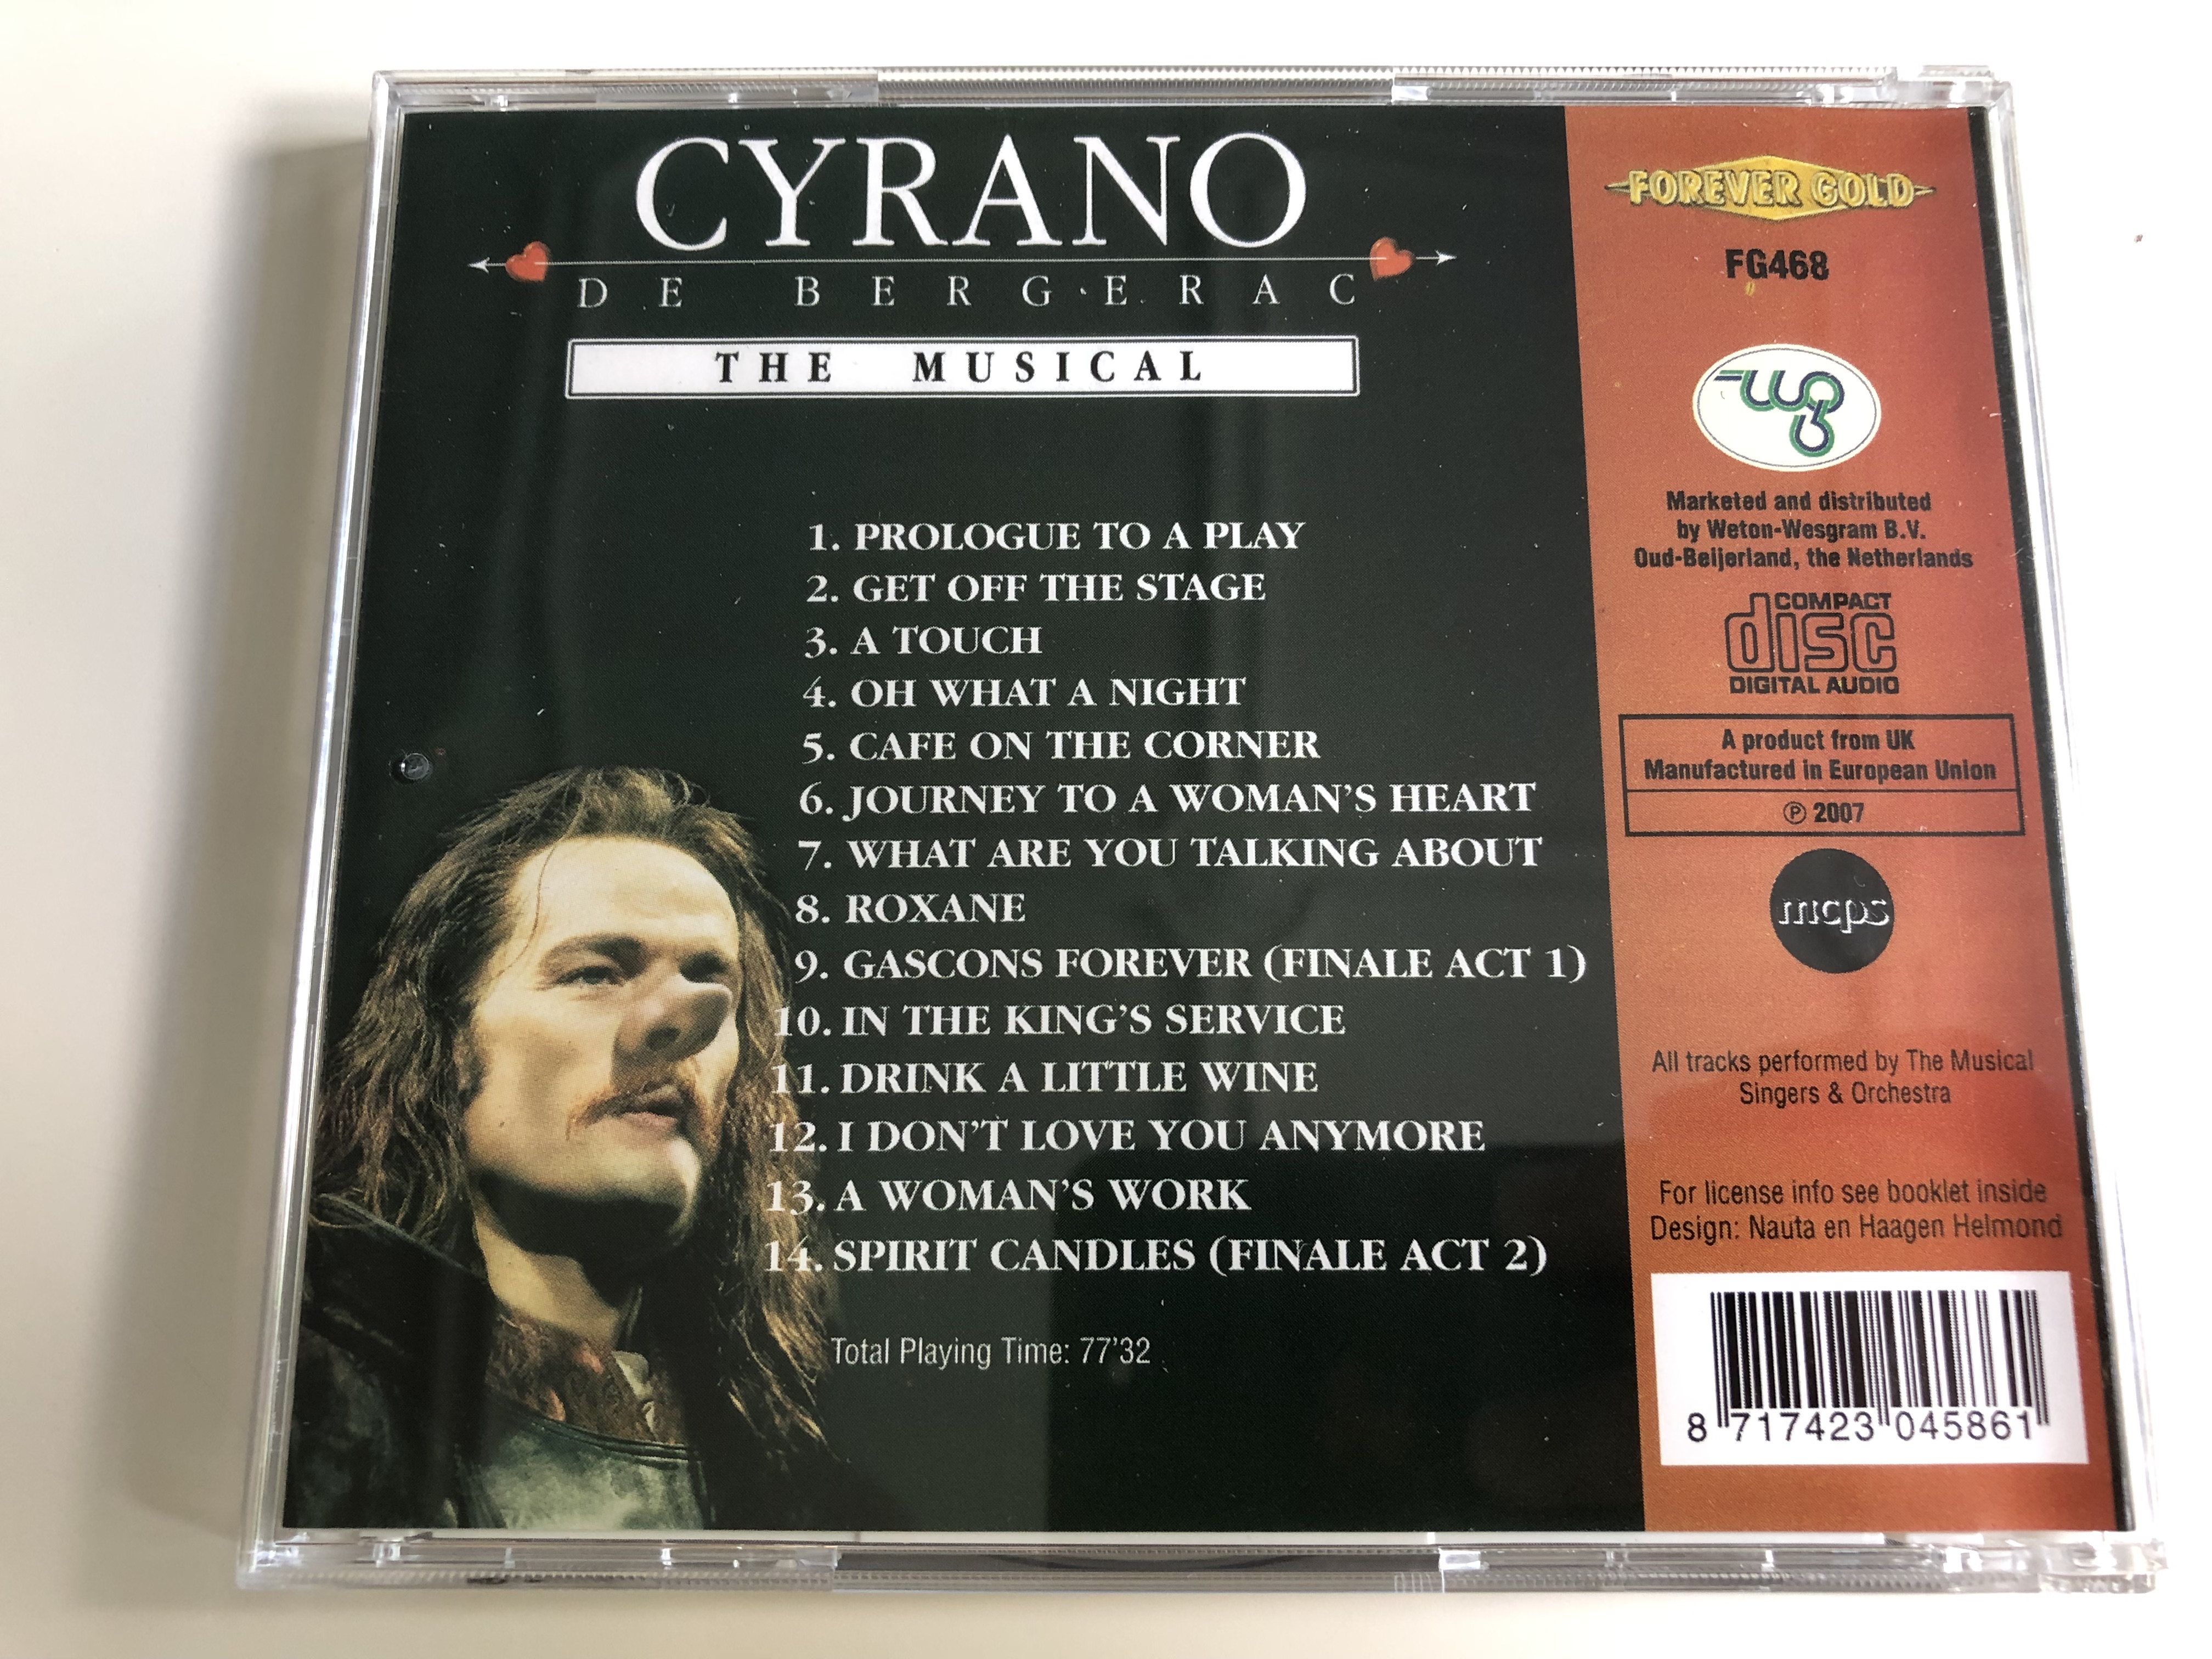 cyrano-de-bergerac-the-musical-a-touch-oh-what-a-night-journey-to-a-woman-s-heart-performed-by-the-prestige-symphony-orchestra-singers-audio-cd-2007-fg468-3-.jpg